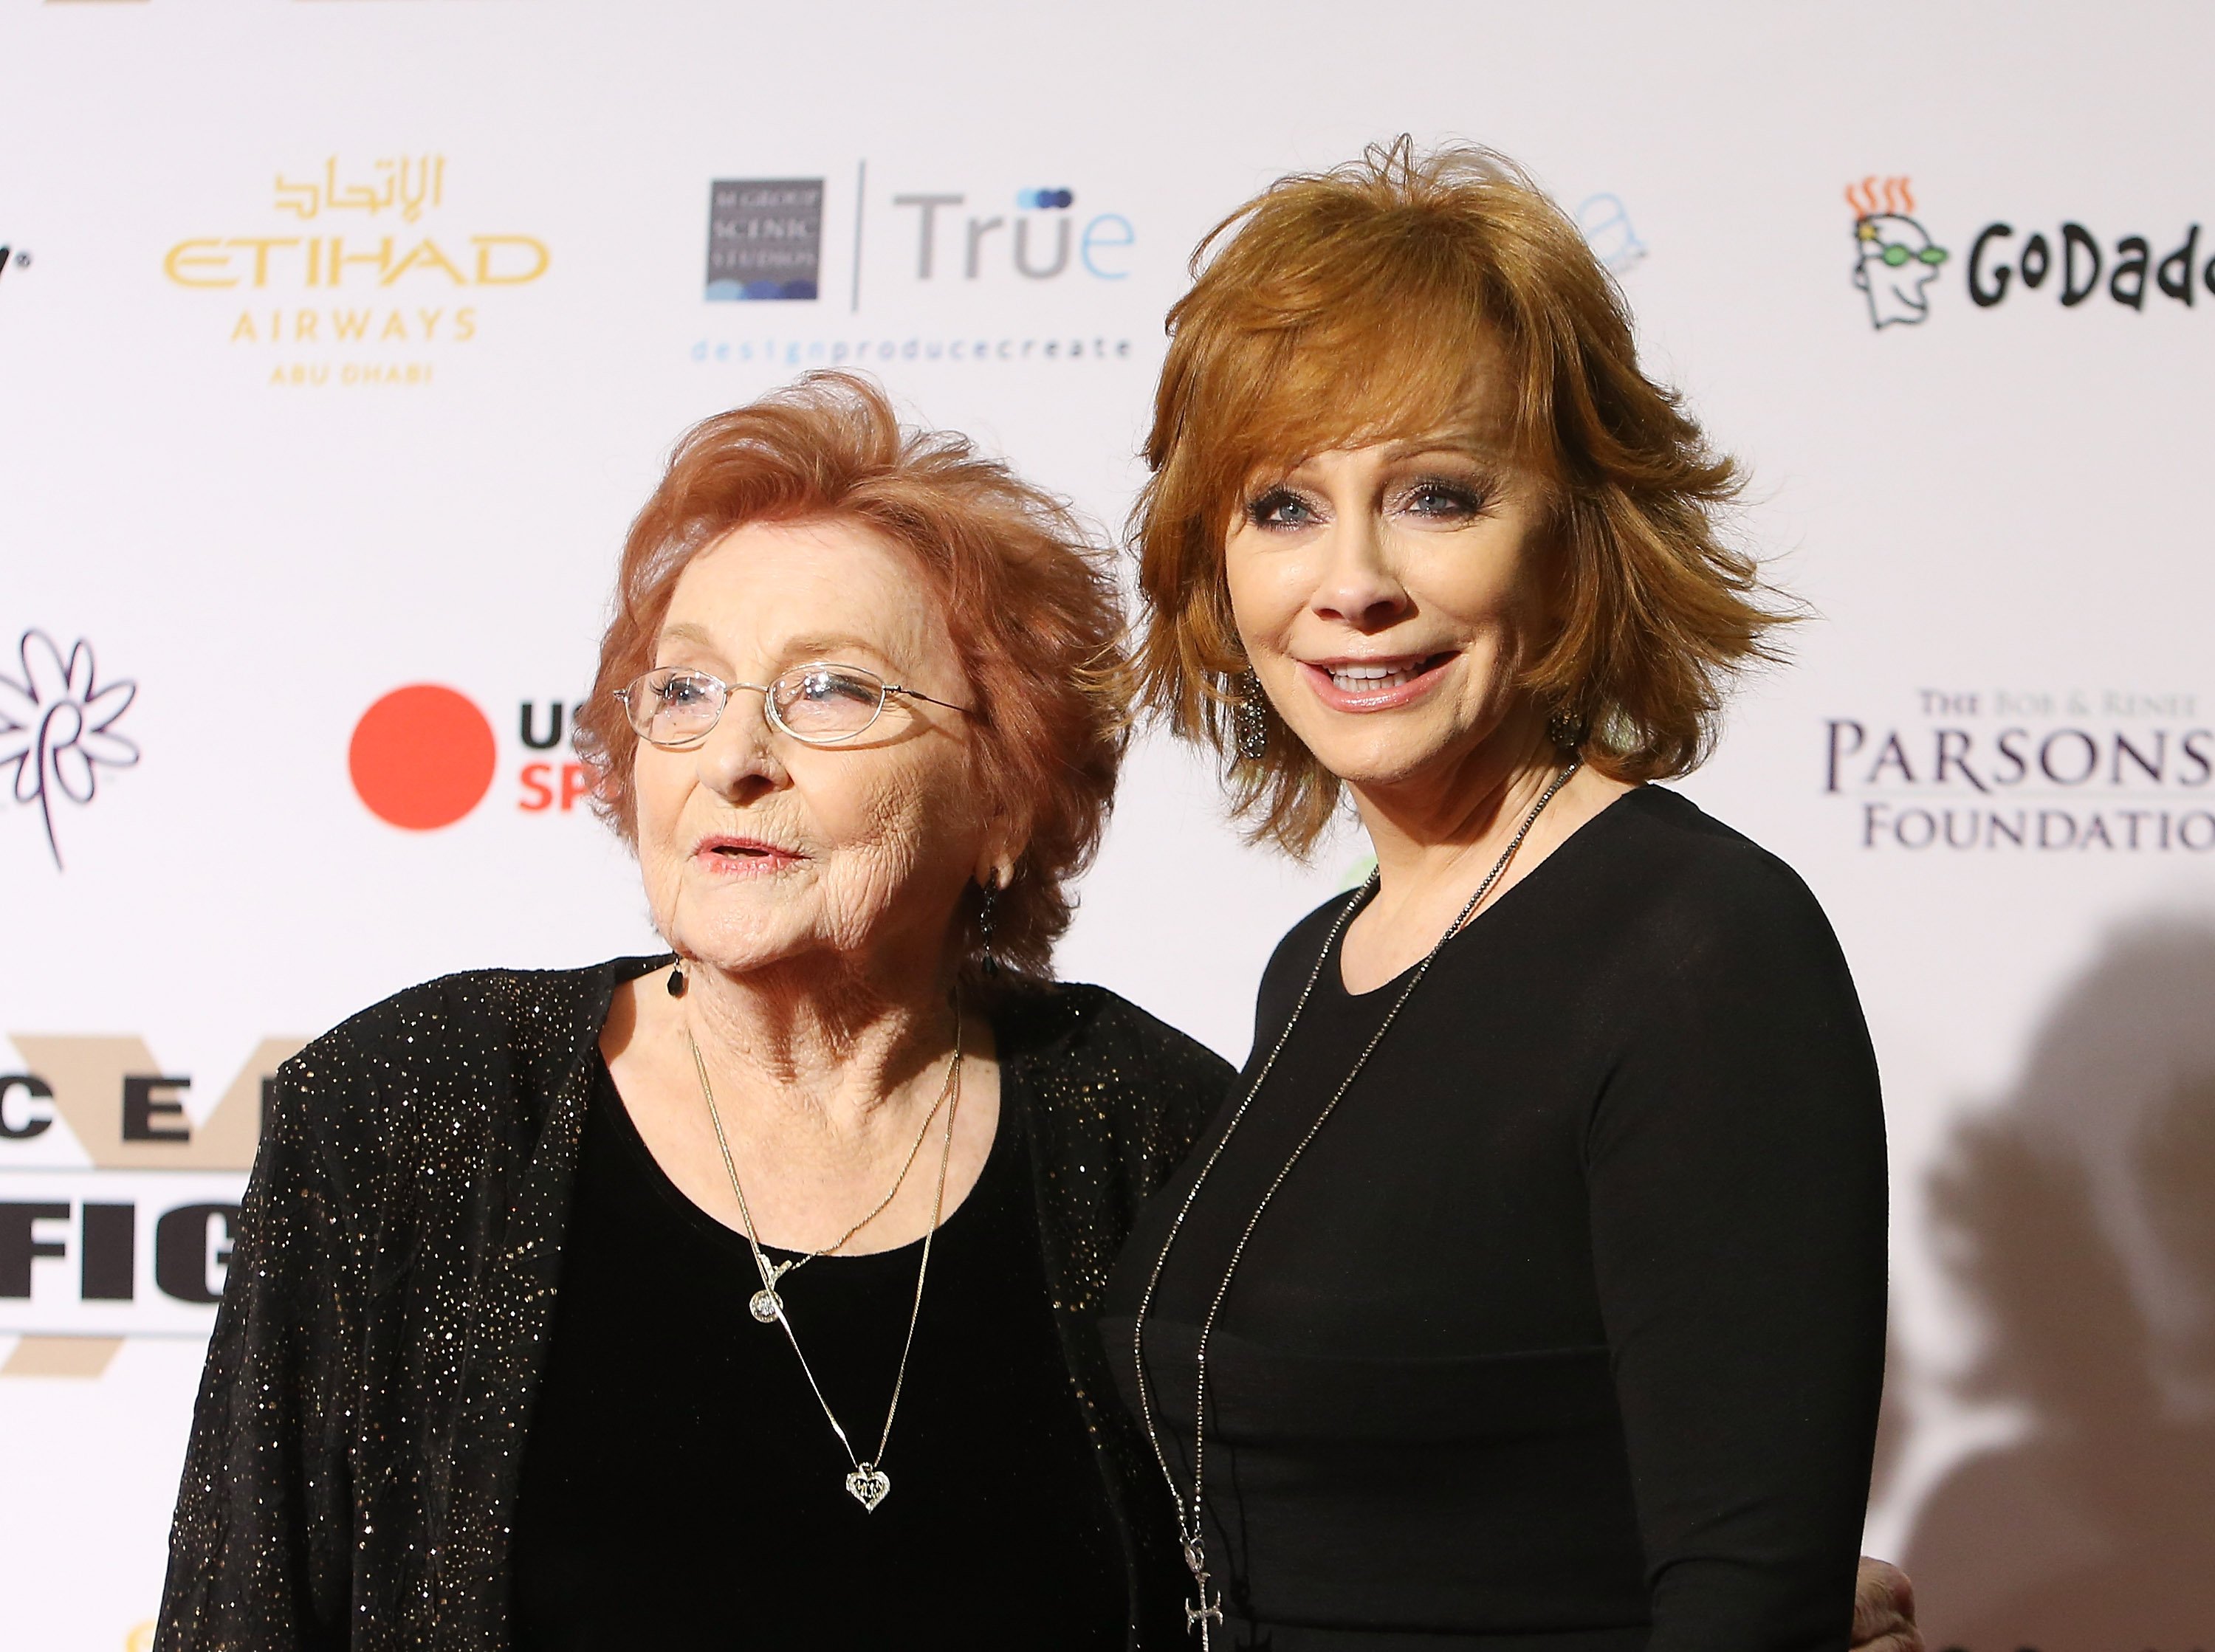  Reba McEntire (R) and Jacqueline Smith arrive at Muhammad Ali's 22nd Celebrity Fight Night held at JW Marriott Desert Ridge Resort & Spa on April 9, 2016 in Phoenix, Arizona. | Source: Getty Images